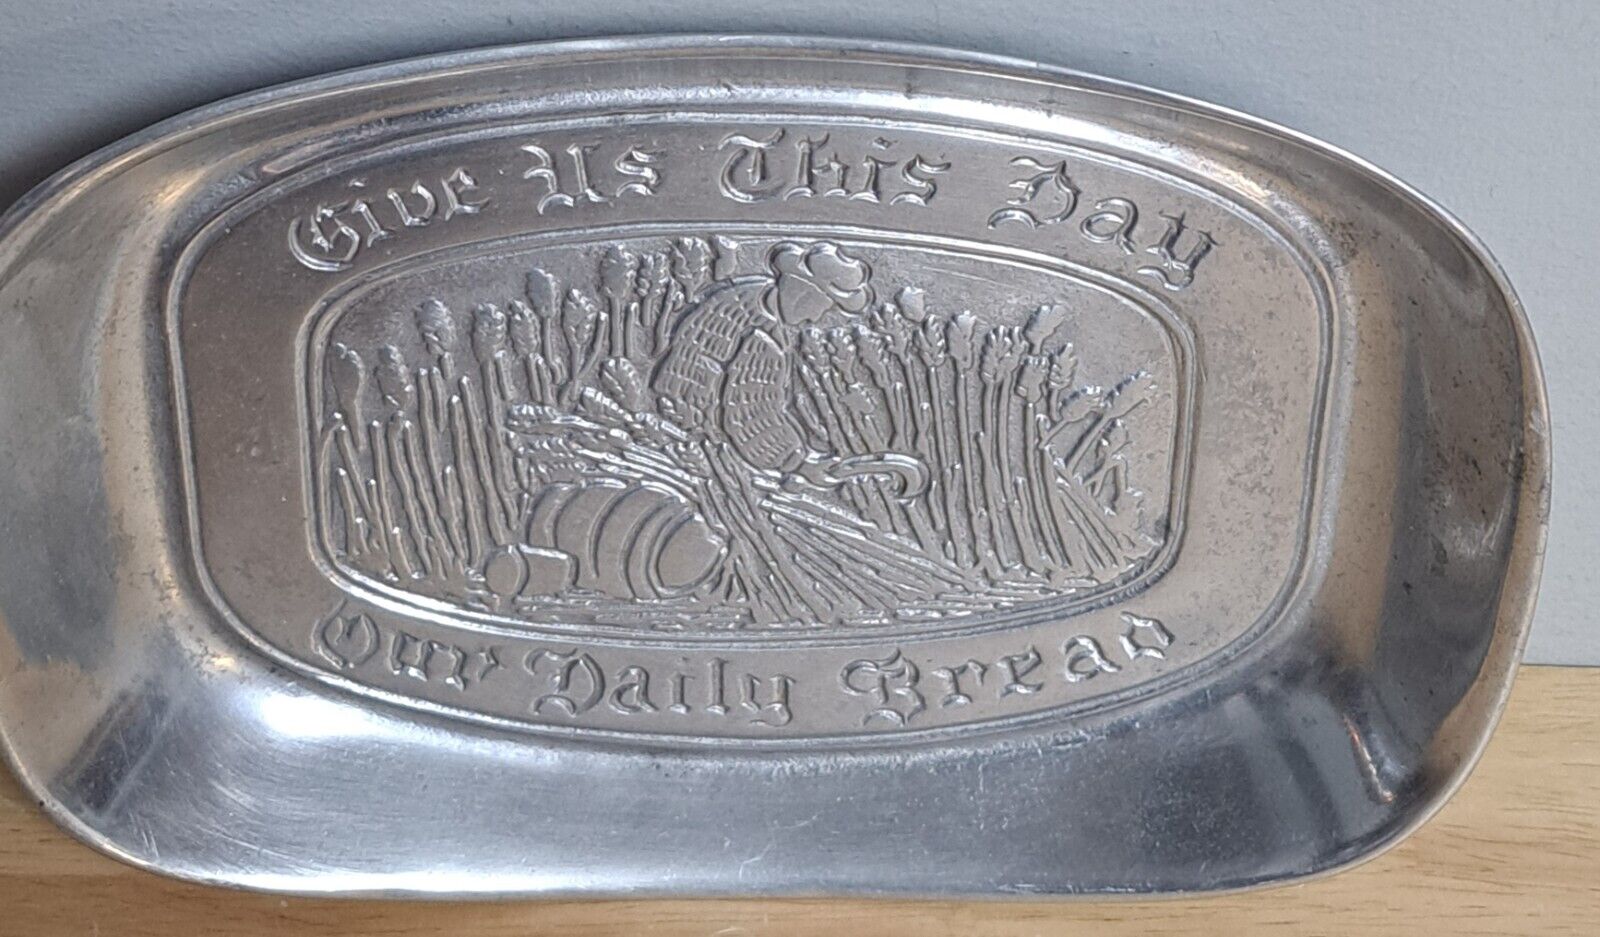 VINTAGE CC CANTRELL PEWTER/ALUMINIUM TRAY GIVE US THIS DAY OUR DAILY BREAD